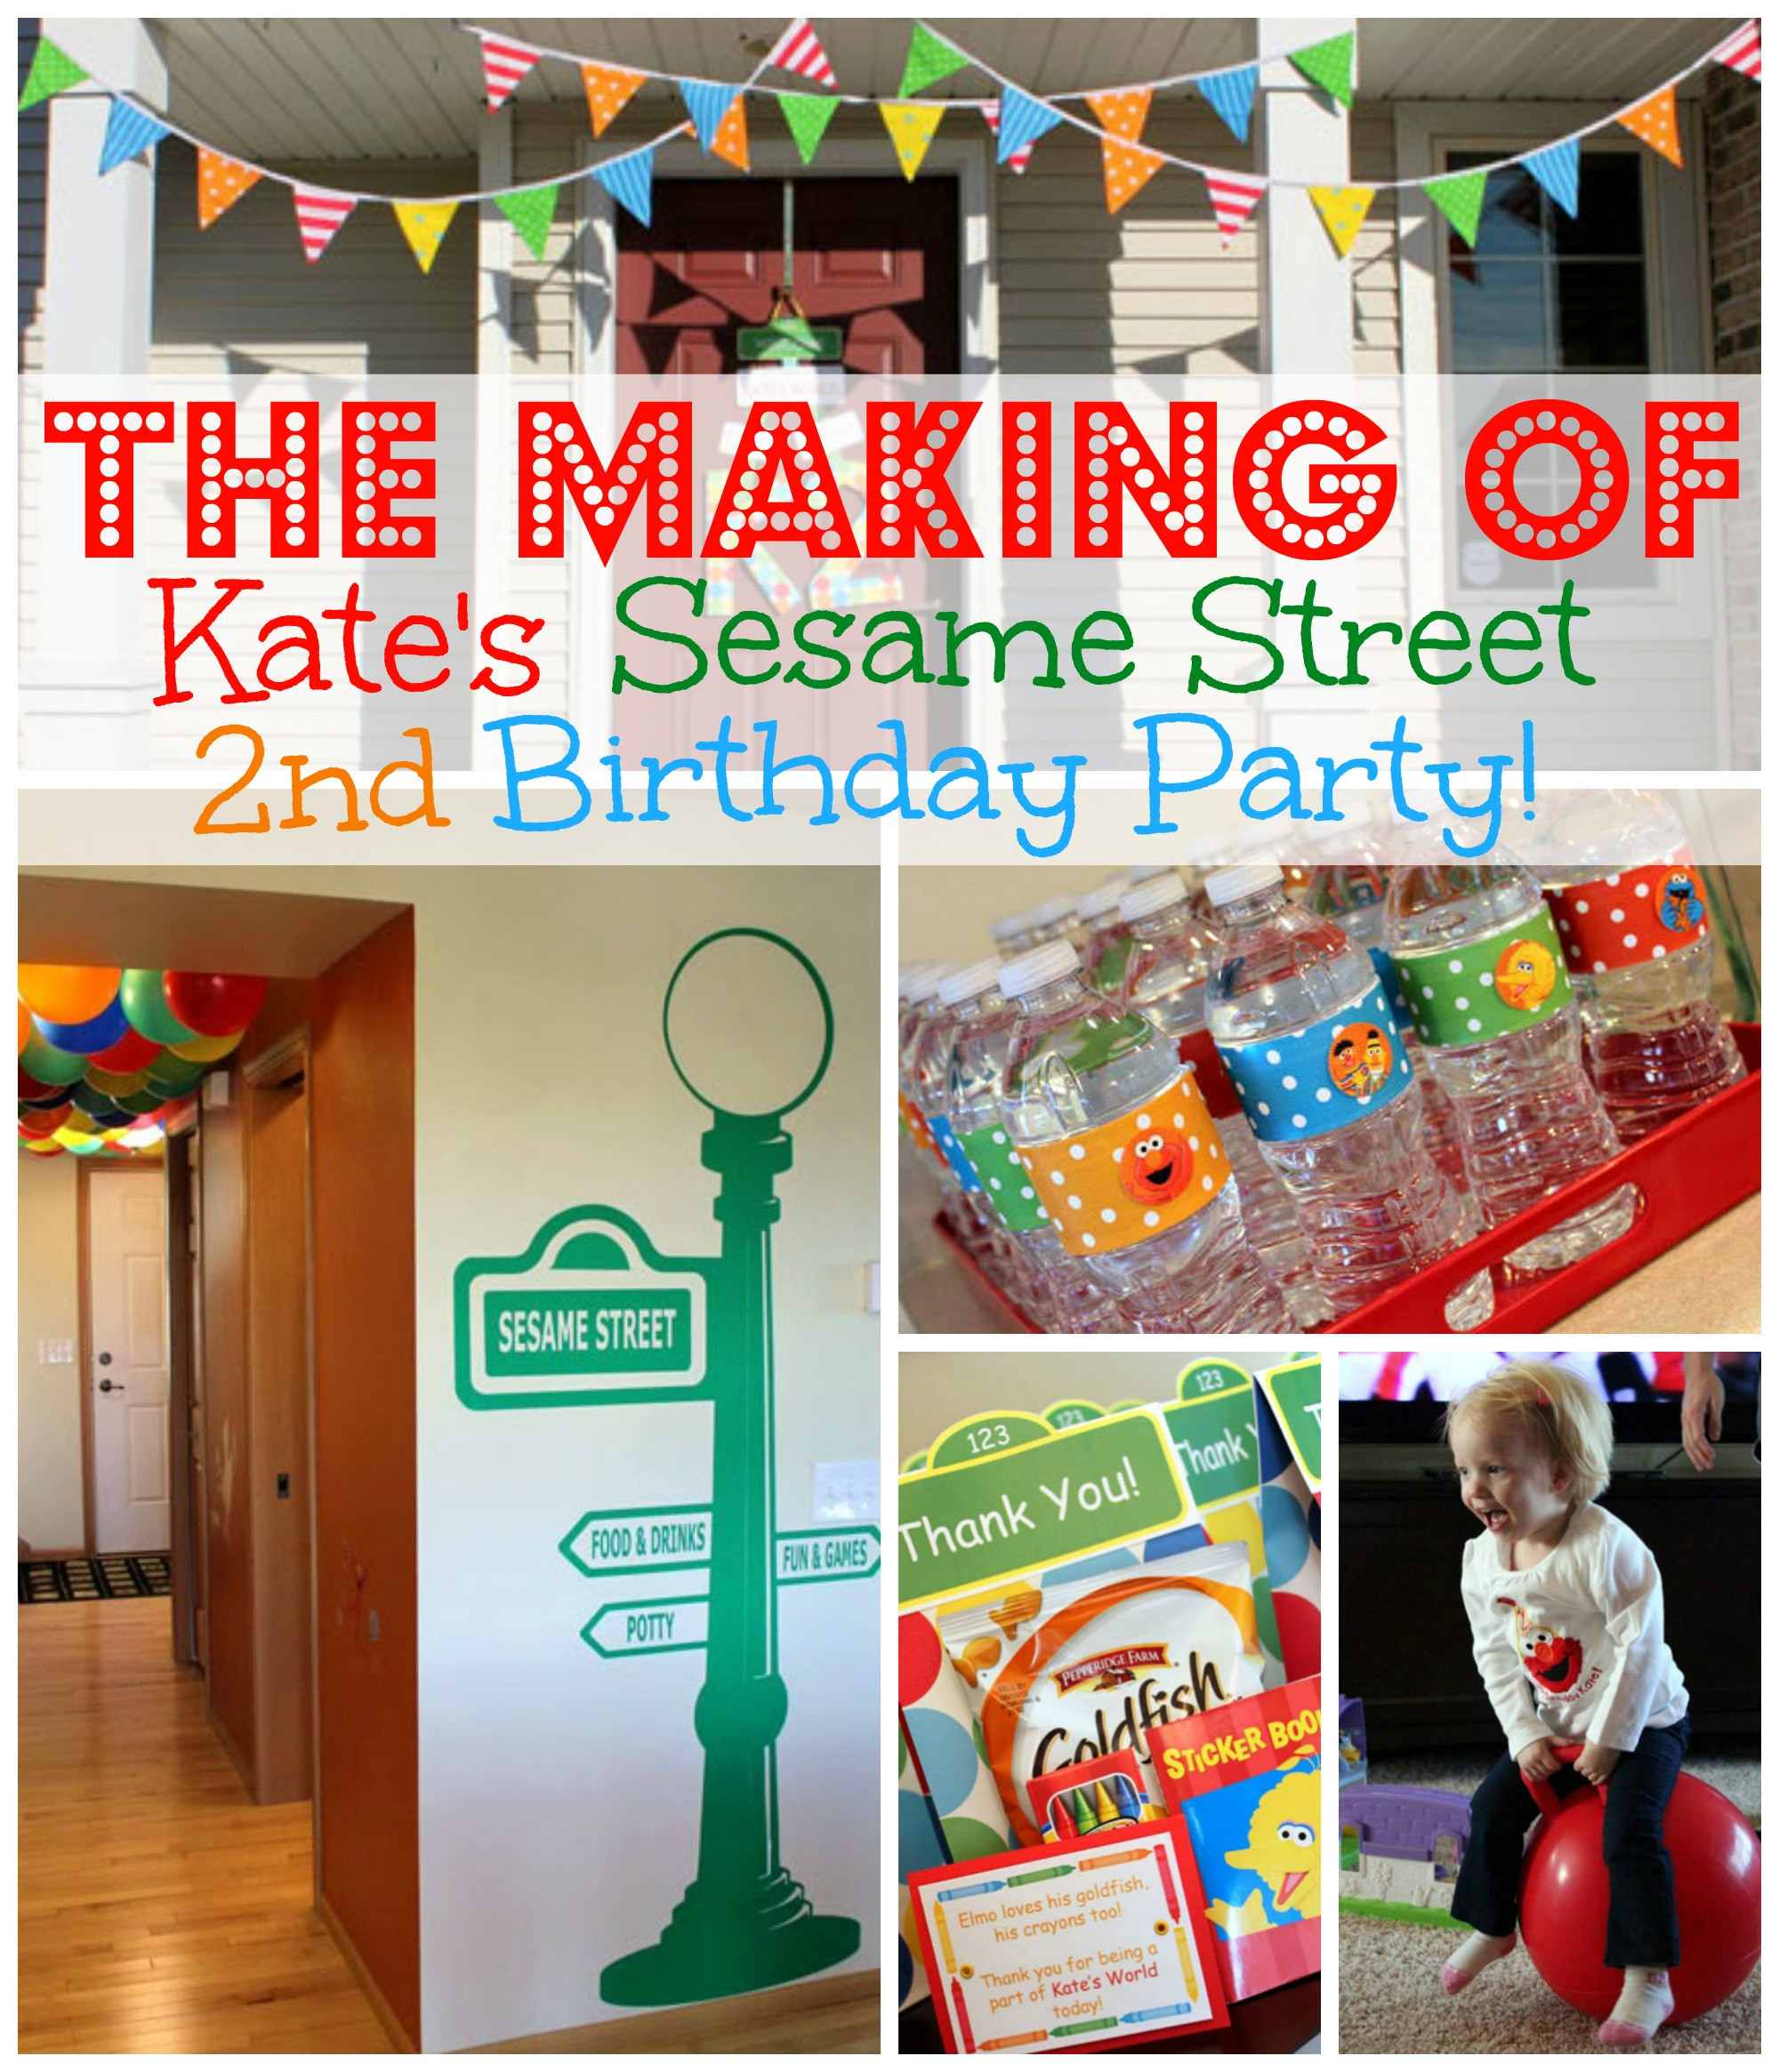 Sesame Street Birthday Party Decorations
 The Making of Kate s Sesame Street Birthday Party